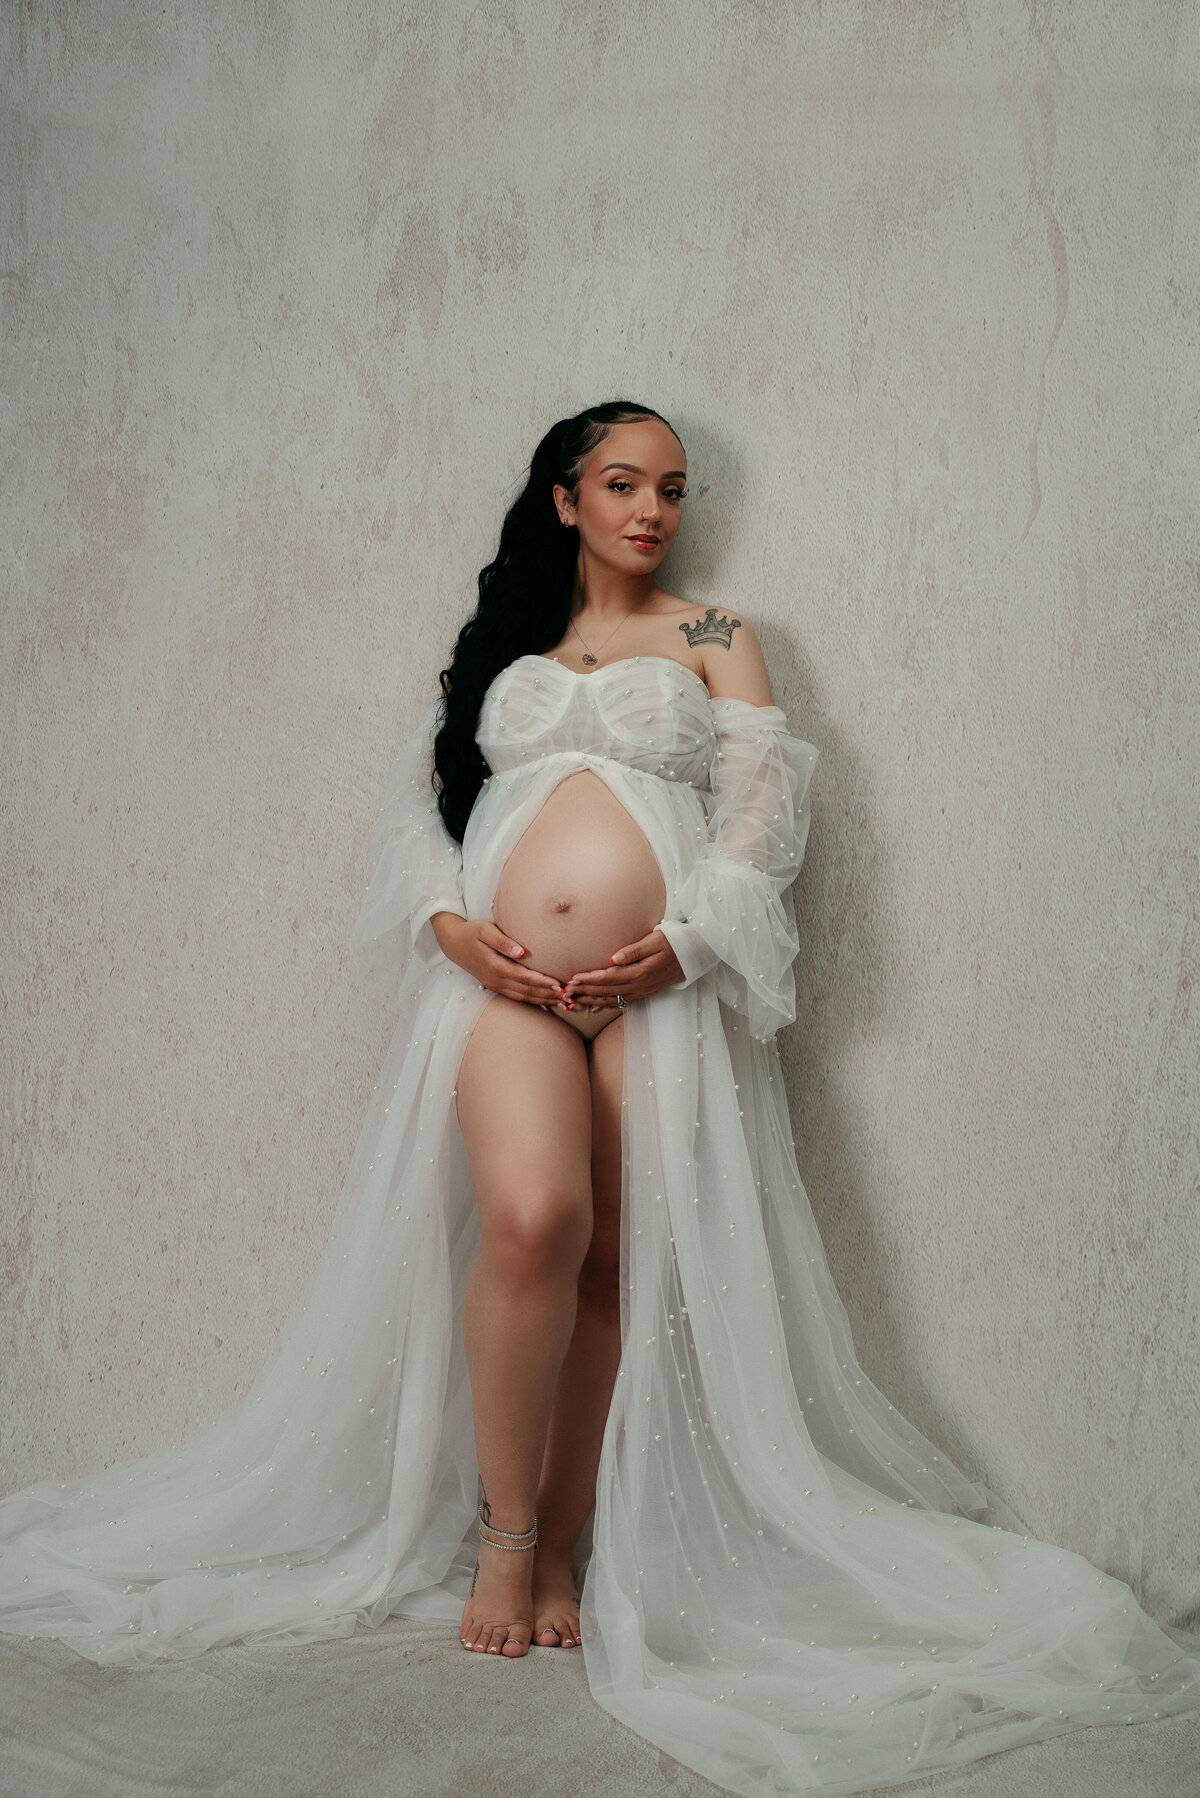 Pregnancy portrait of woman leaning against white backdrop wearing a long white dress open to see belly